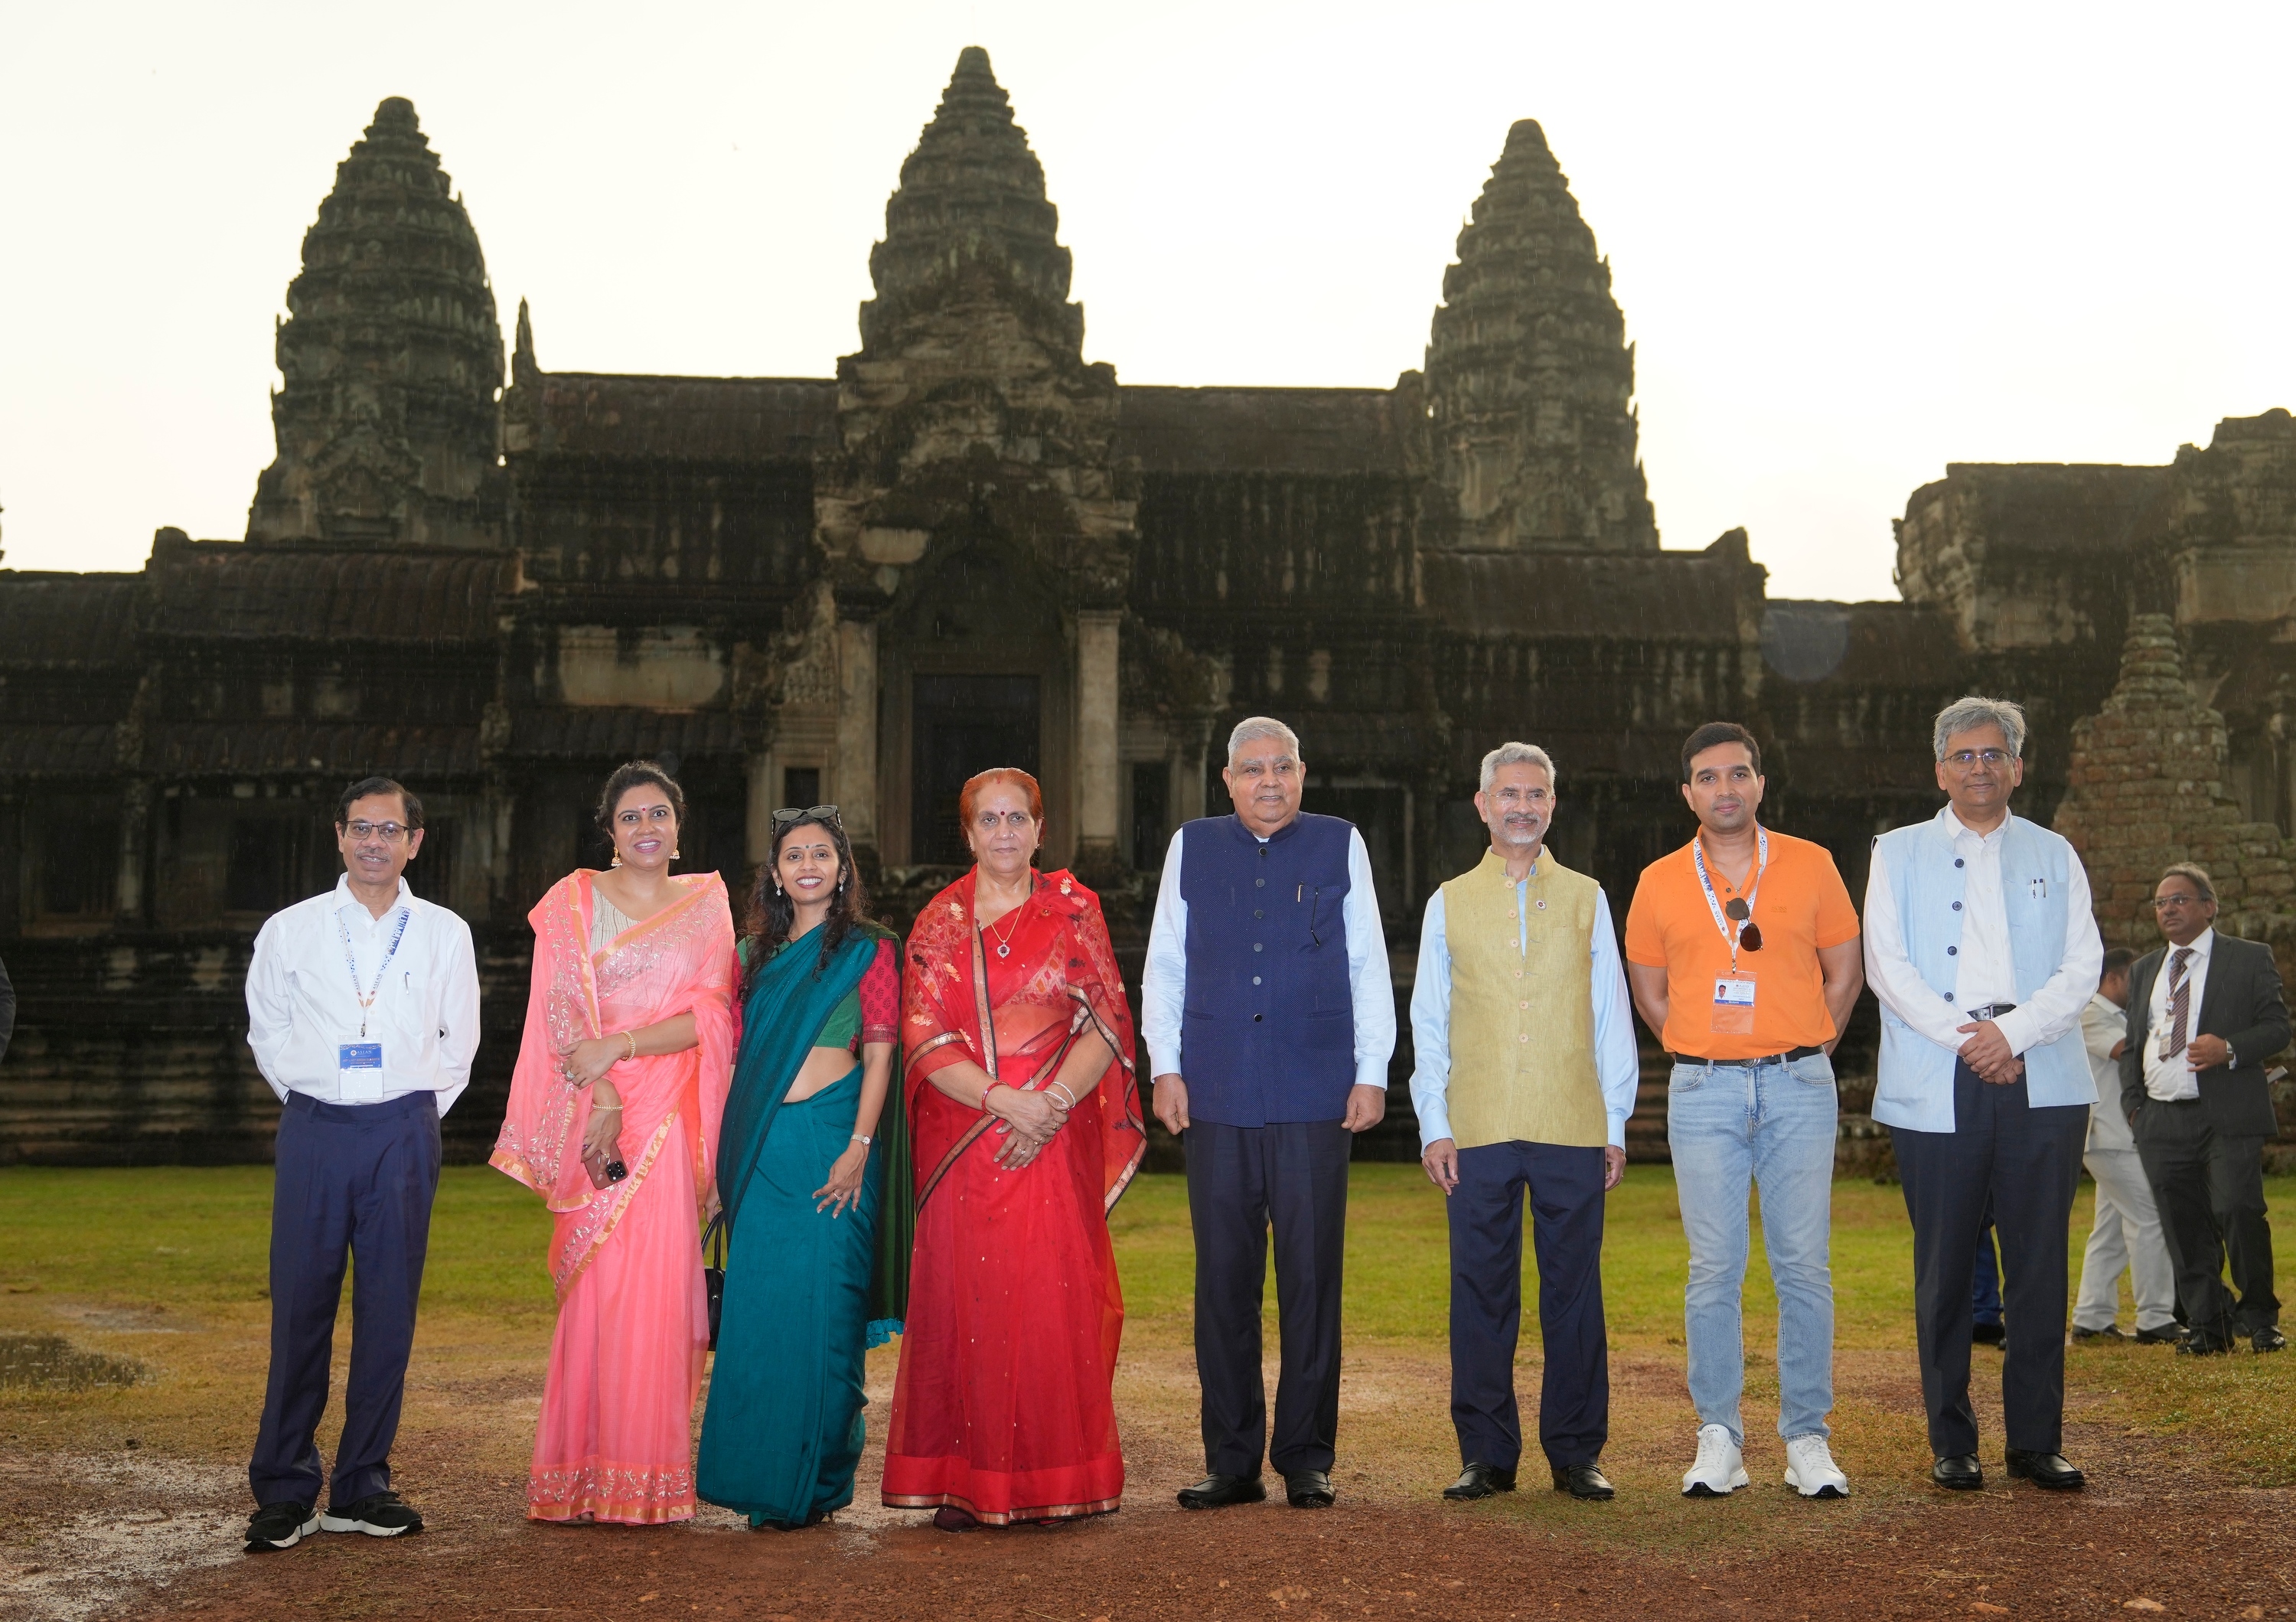 The Vice President, Shri Jagdeep Dhankhar at Angkor Wat temple in Siem Reap, Cambodia on November 13, 2022. The External Affairs Minister, Dr. S. Jaishankar is also present. 